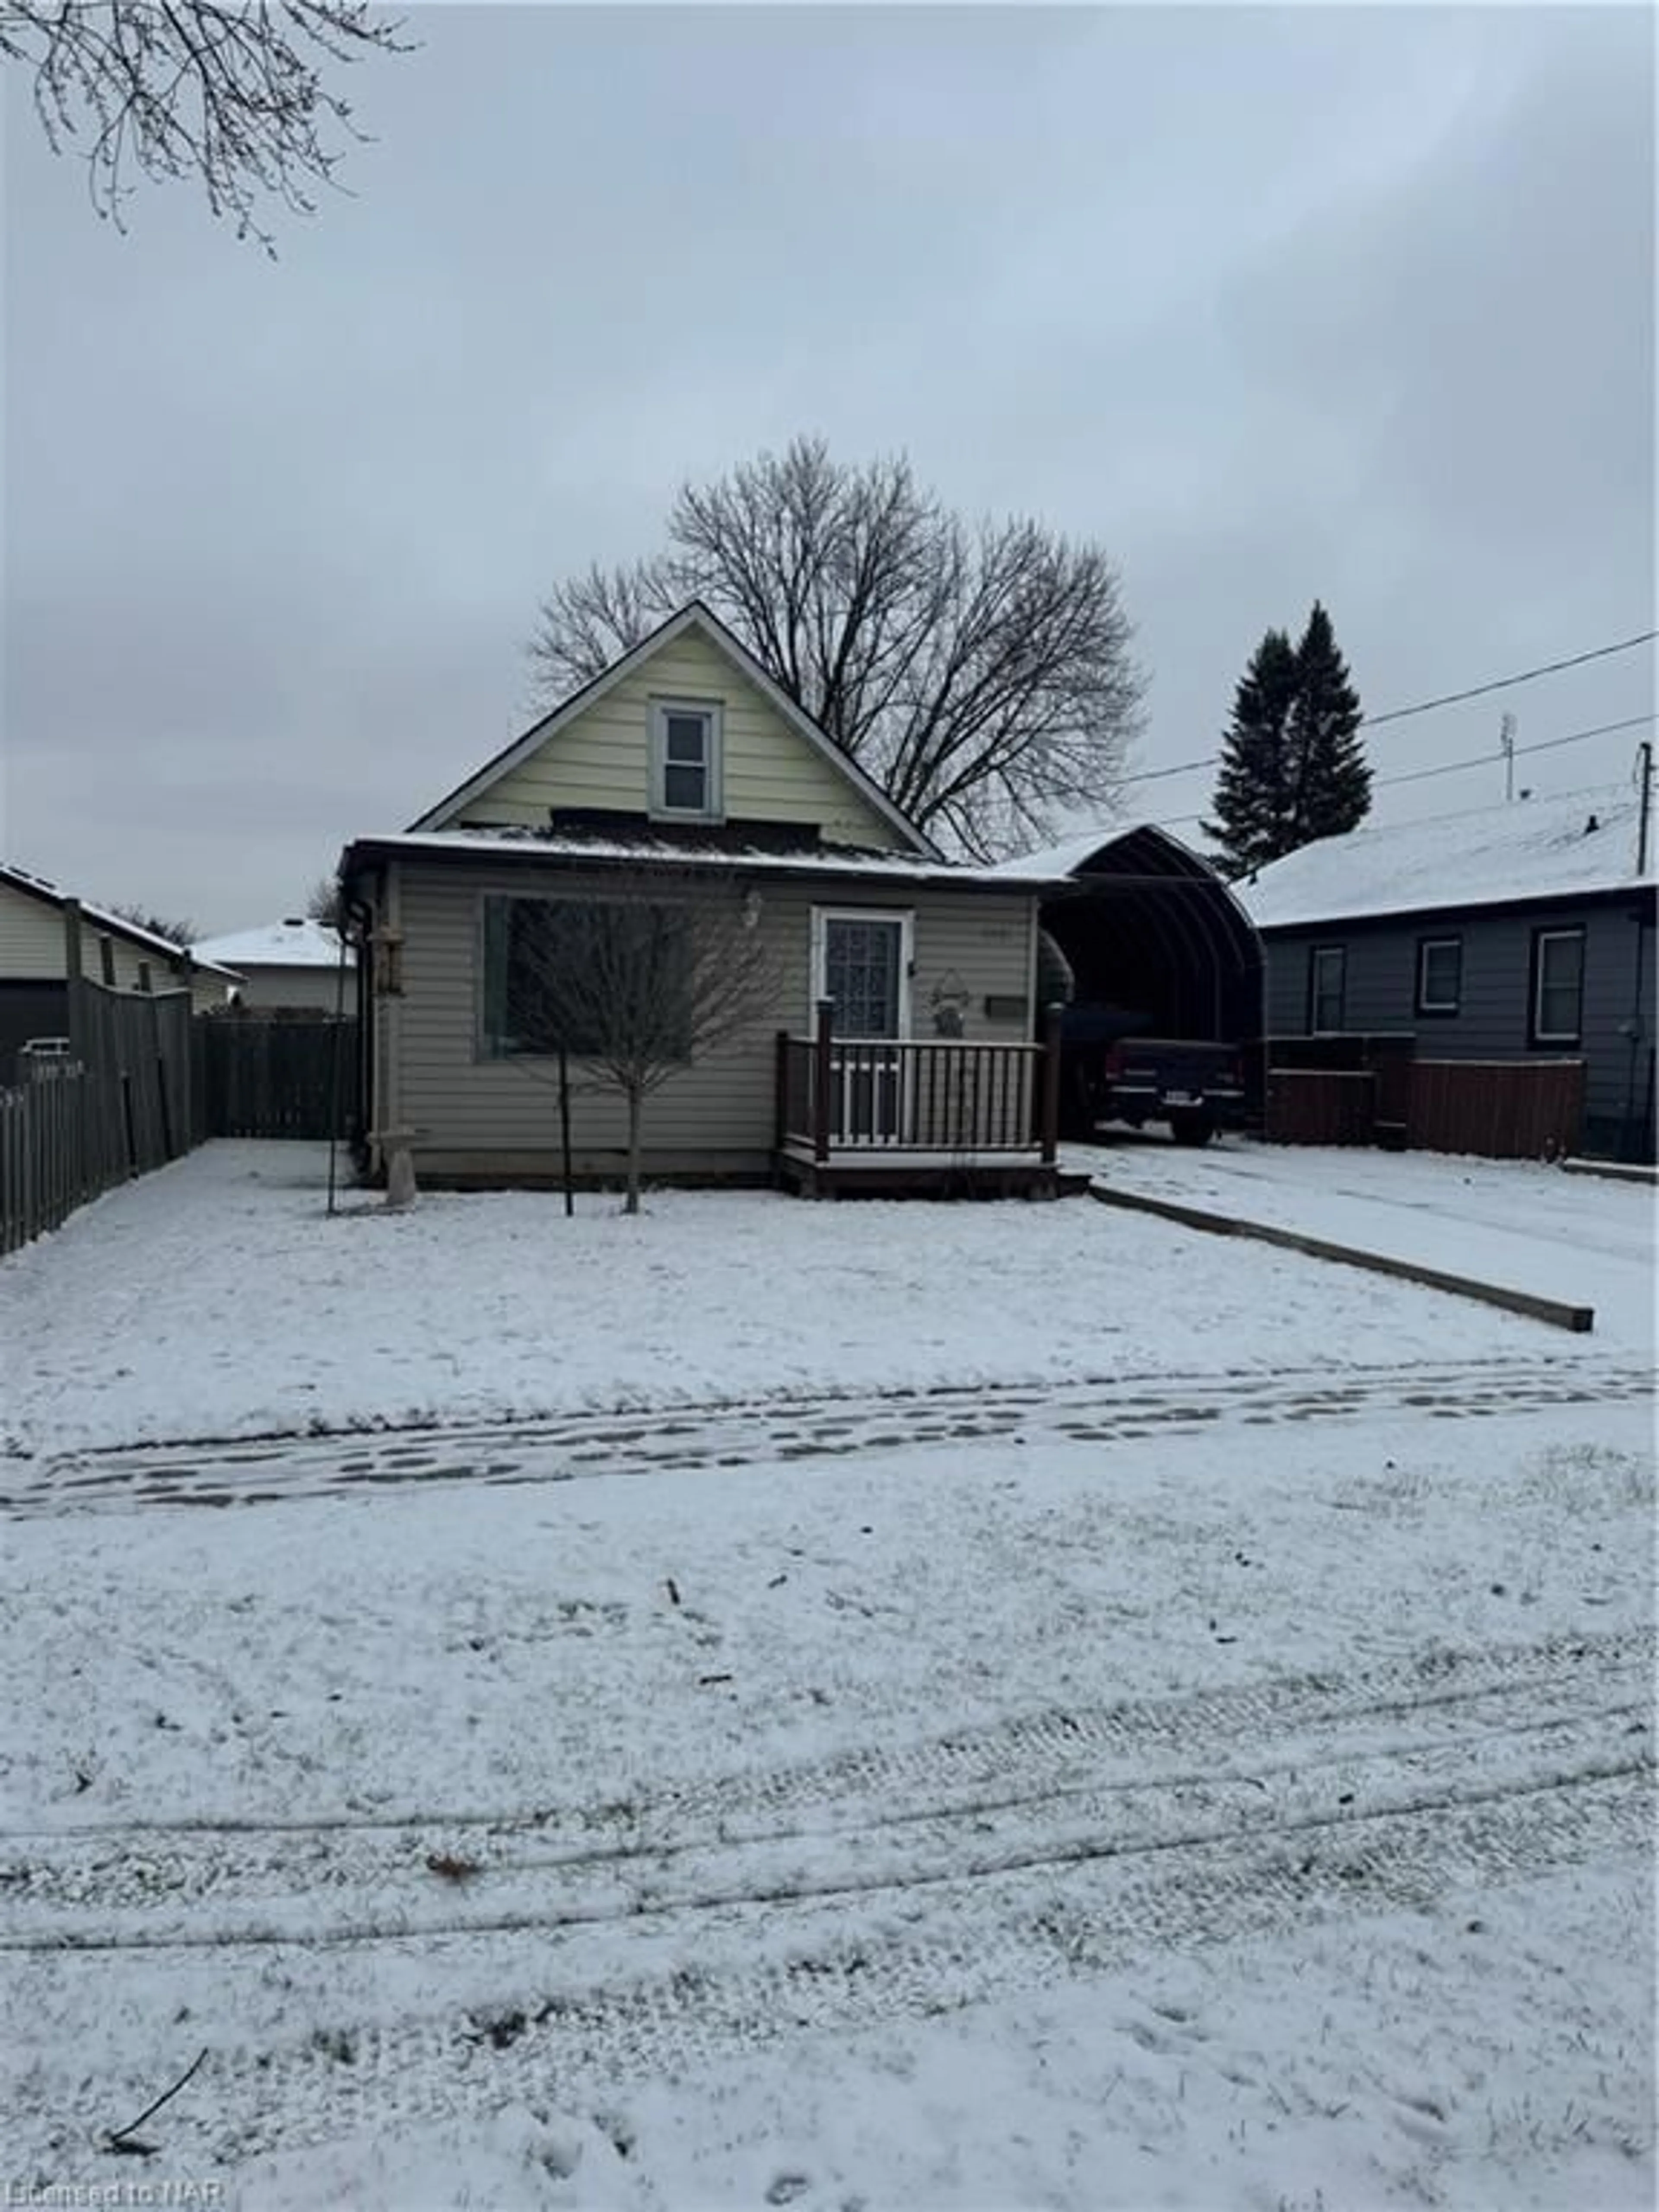 Frontside or backside of a home for 6481 Bellevue St, Niagara Falls Ontario L2E 1Y9